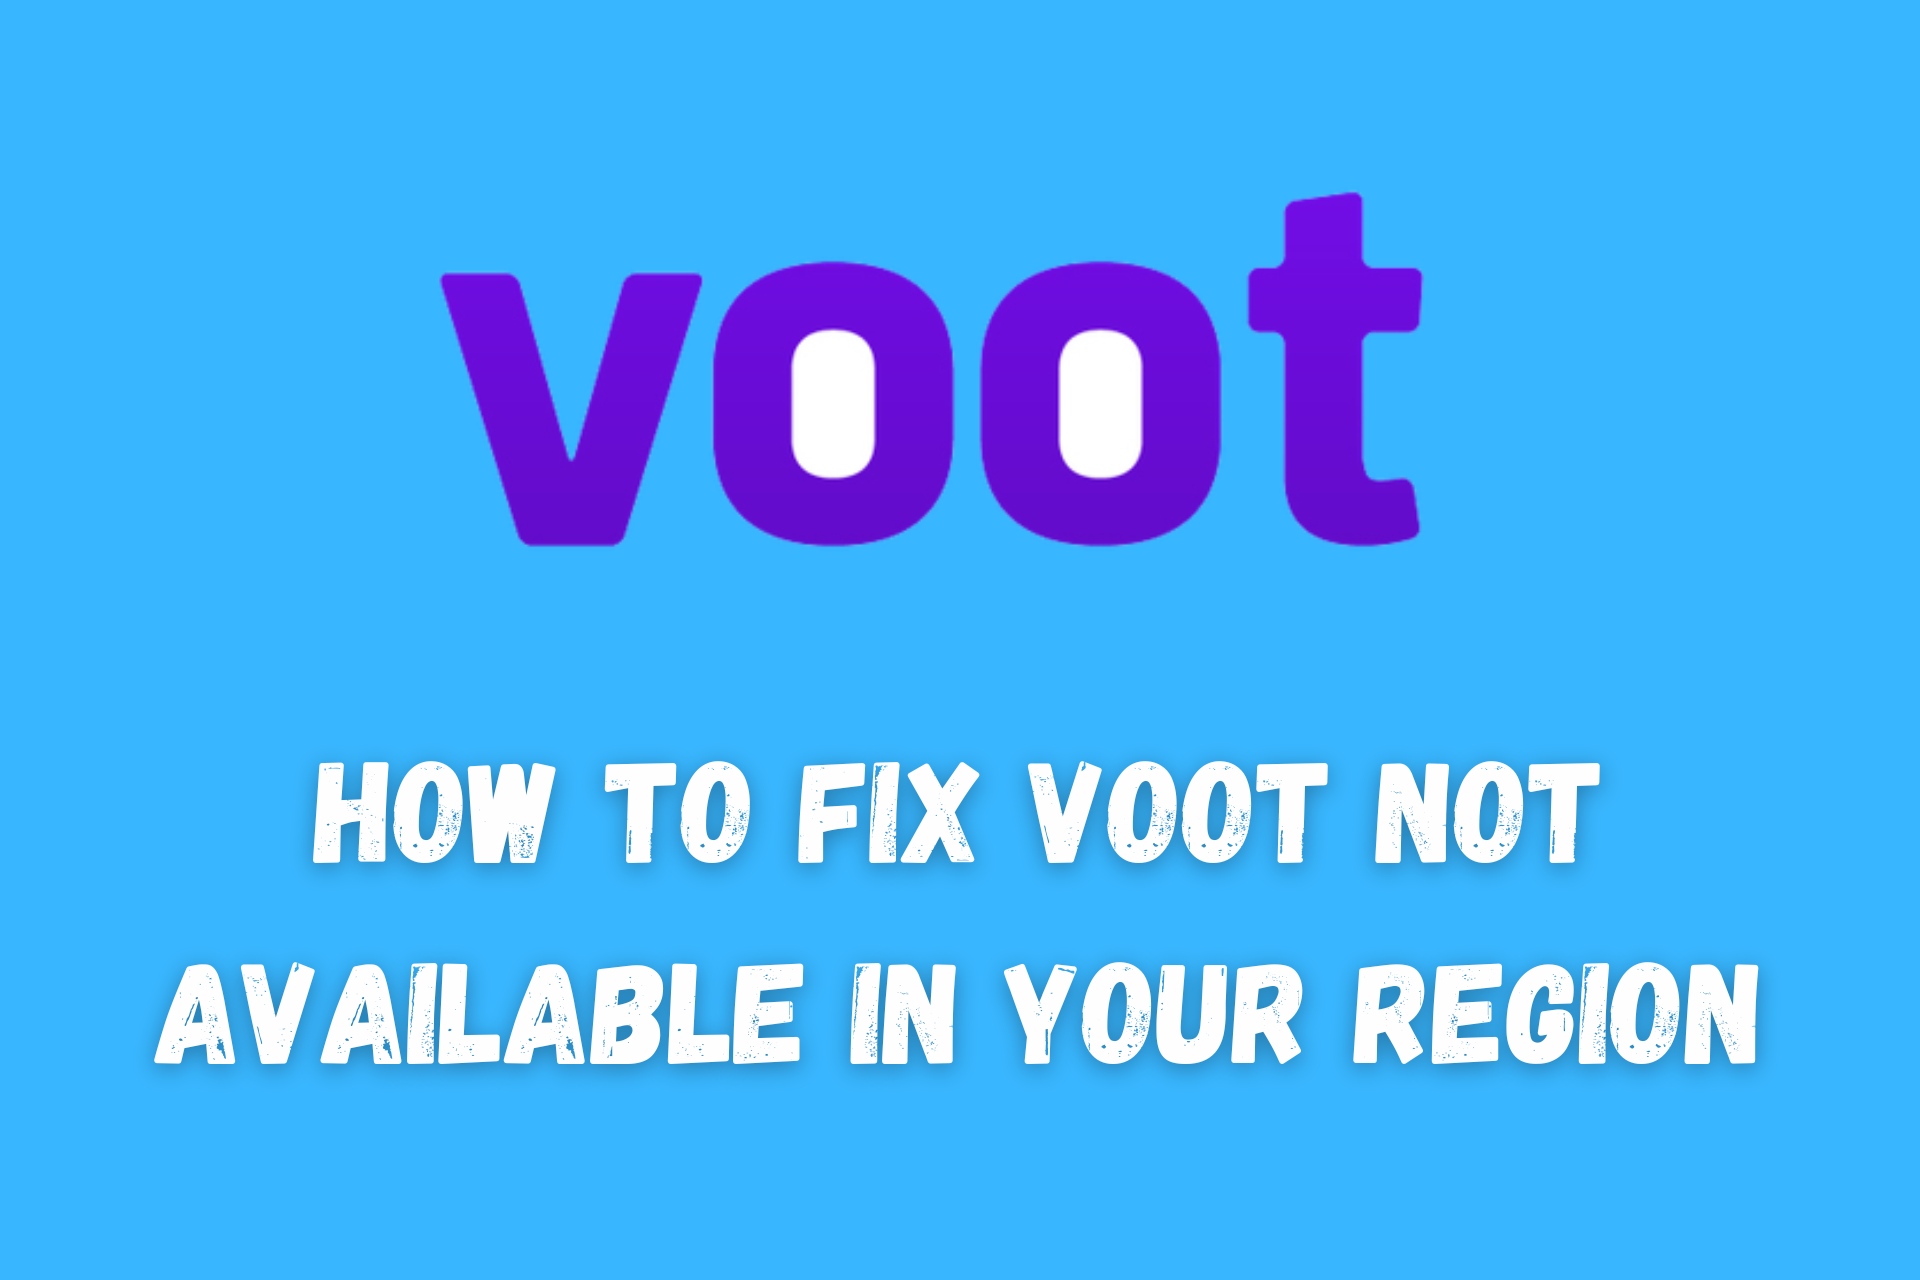 voot is not available in your region